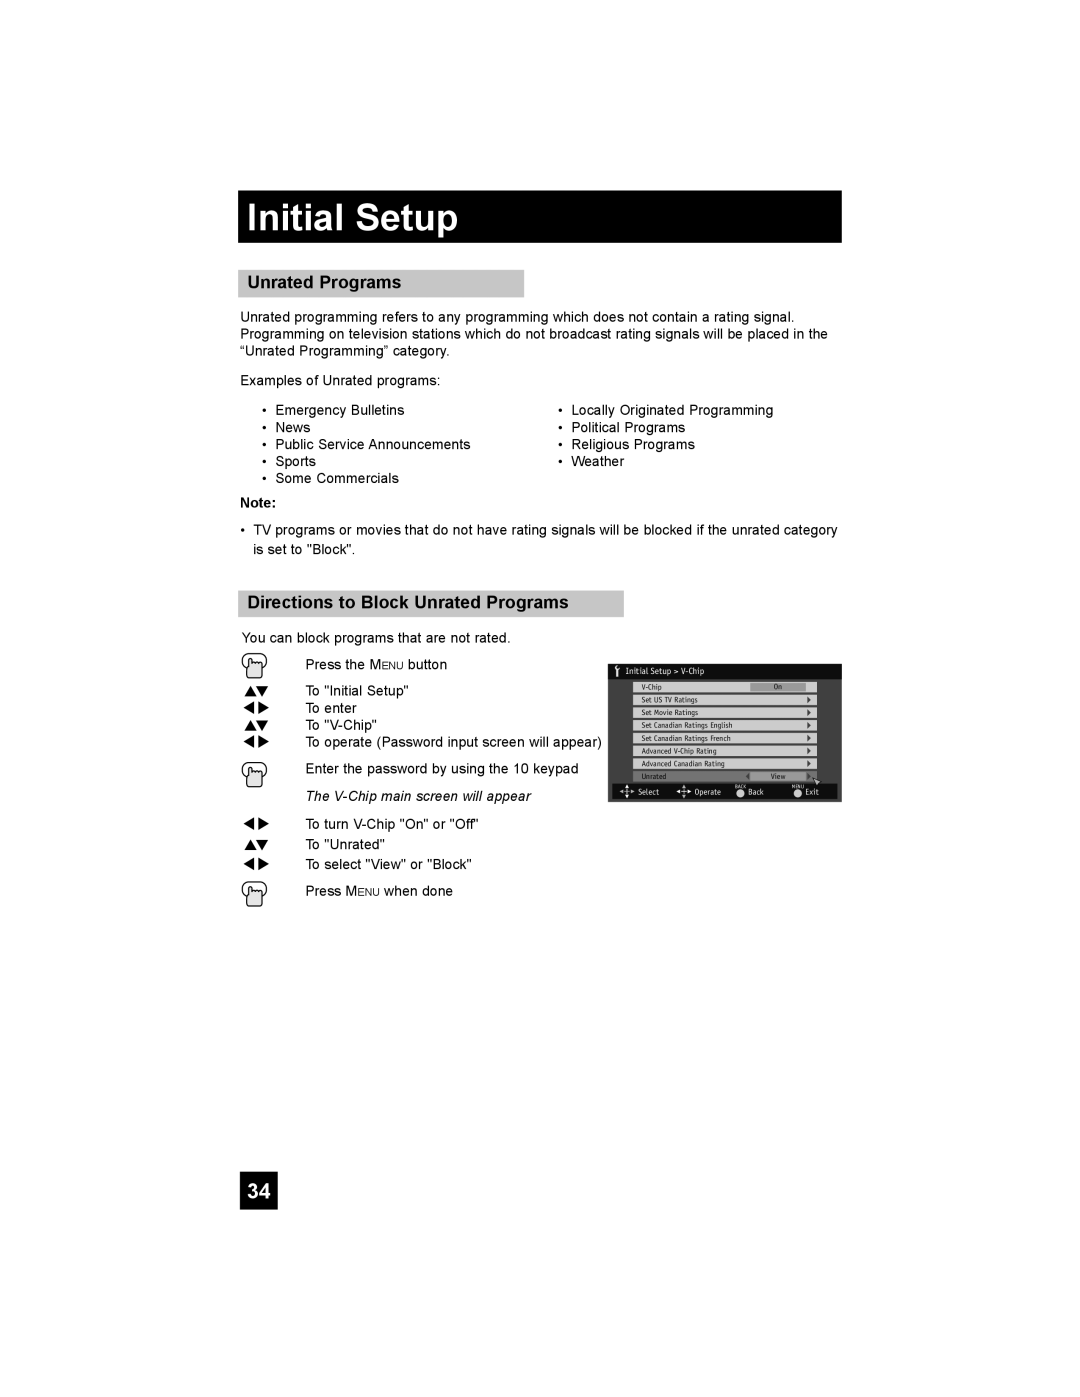 JVC LT-42X688, LT-37X688 manual Directions to Block Unrated Programs, Initial Setup 